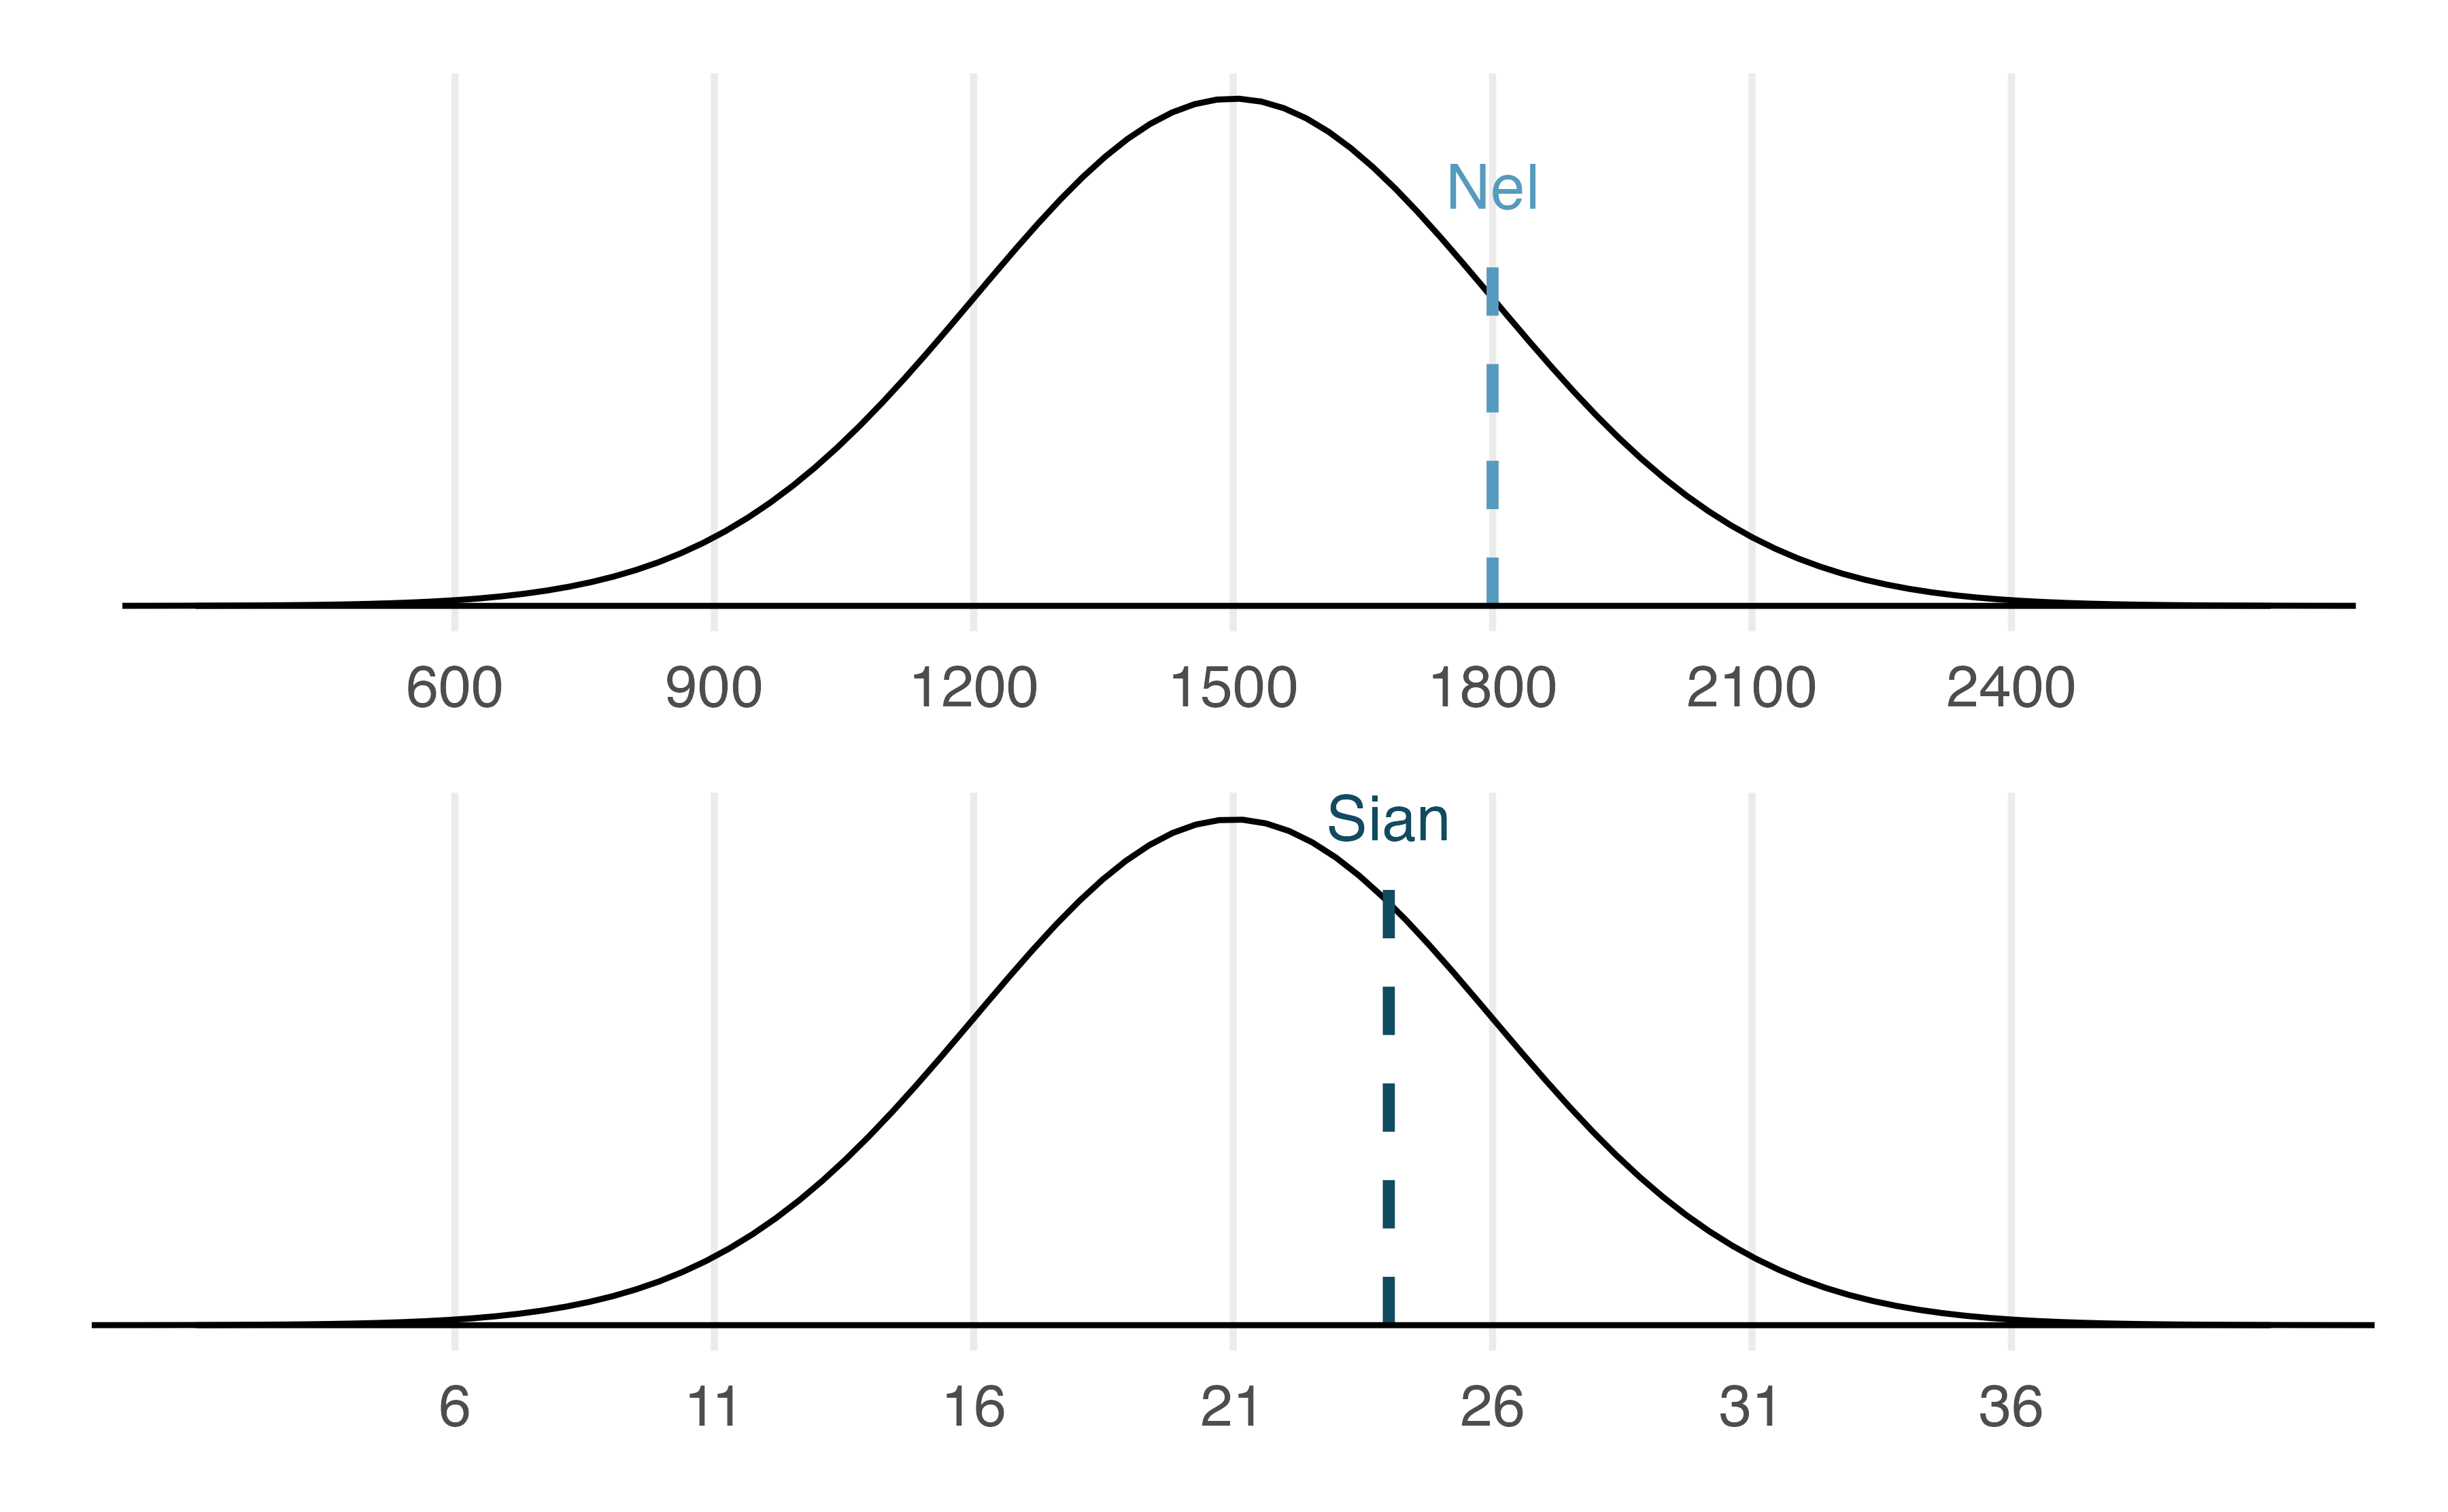 Nel's SAT score is plotted on a normal curve with a mean of 1500 and a standard deviation of 300.  Sian's ACT score is plotted on a normal curve with a mean of 21 and a standard deviation of 5. Nel's score is relatively higher than Sian's score.